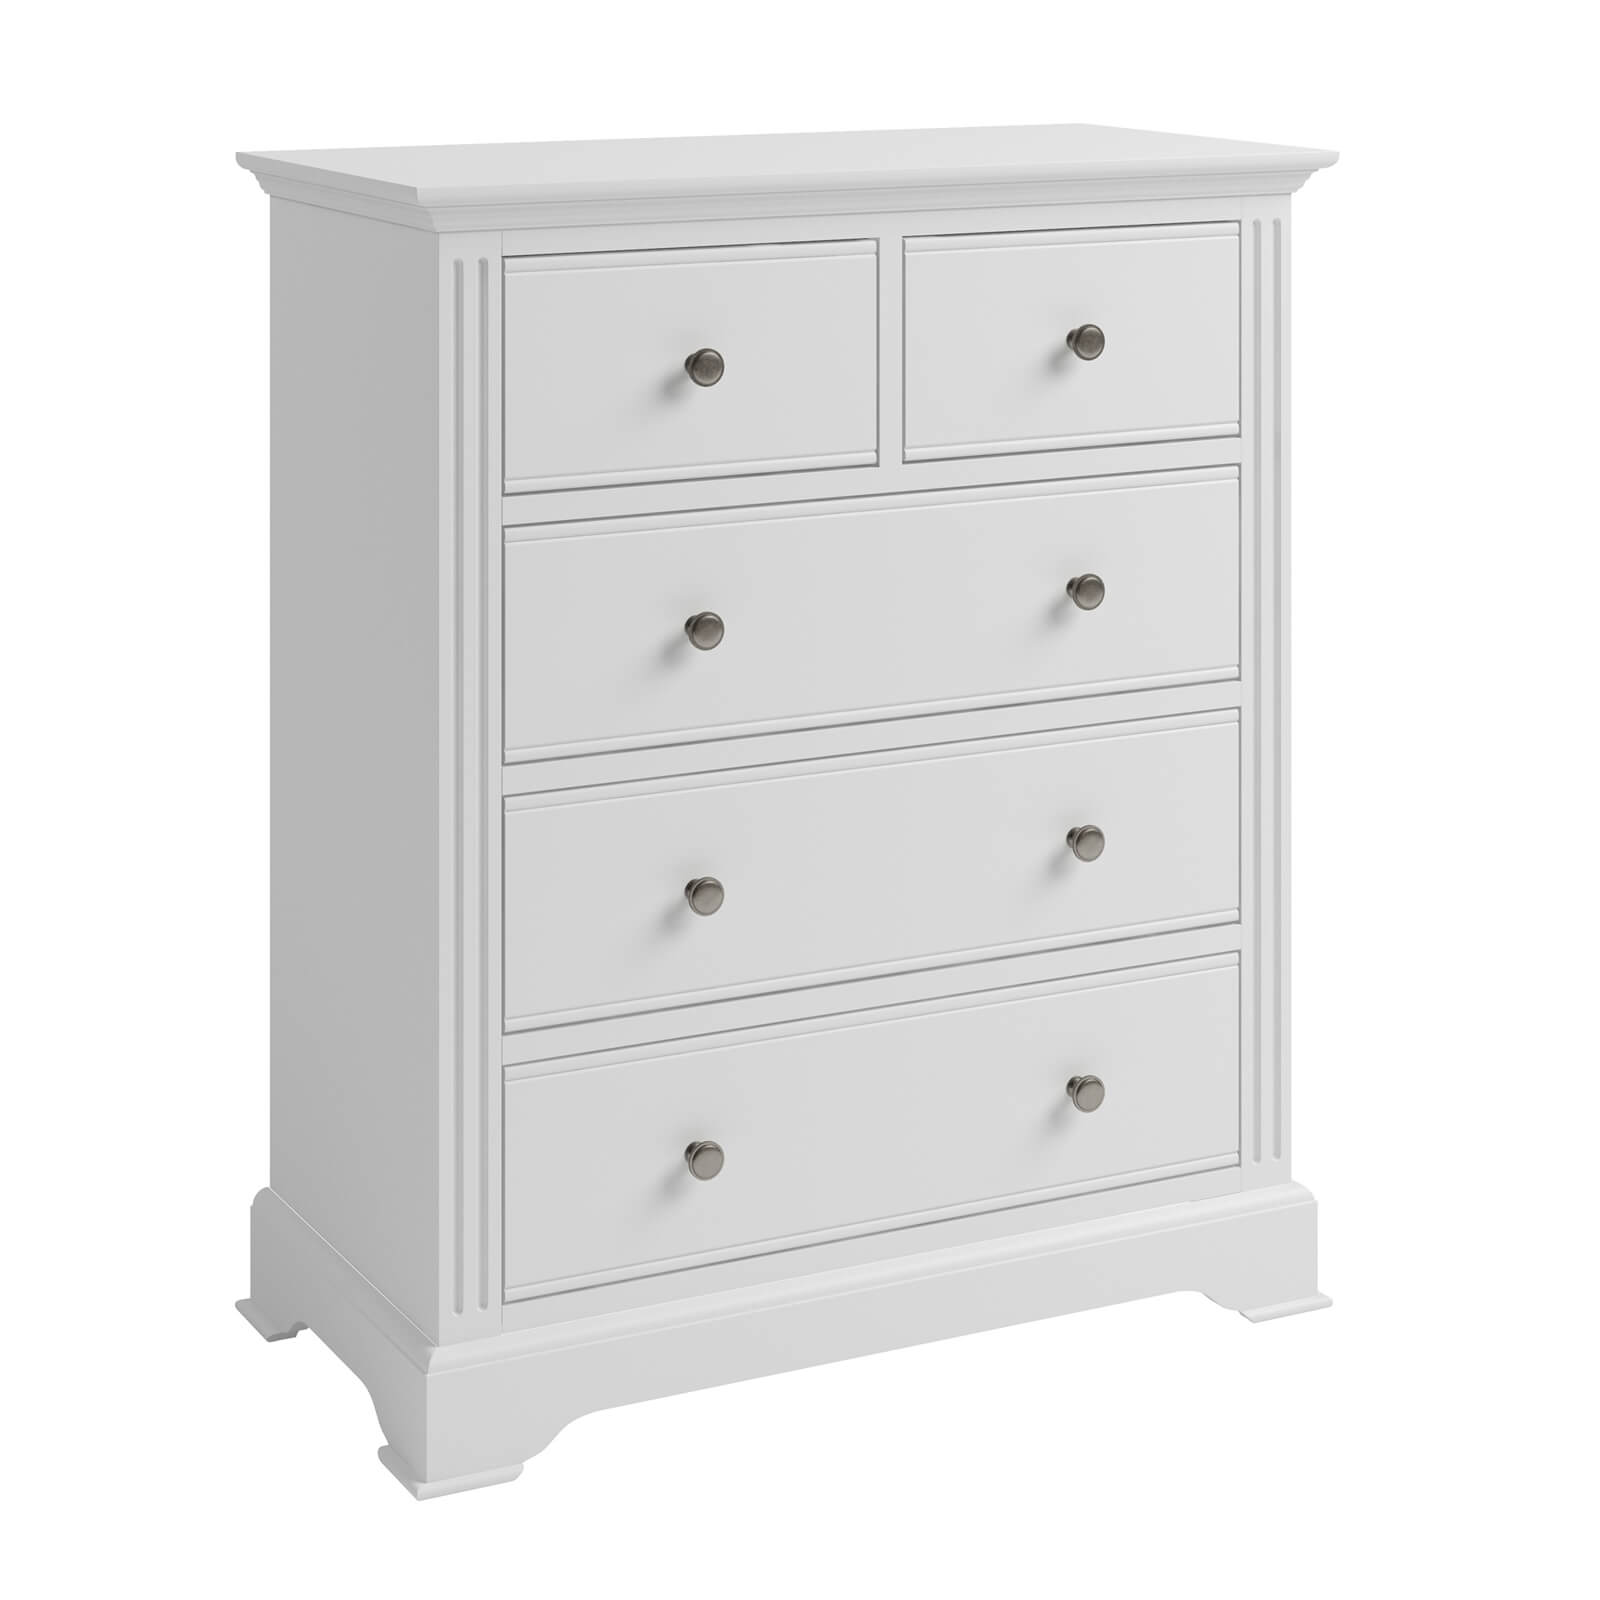 Camborne 2 Over 3 Chest of Drawers - White